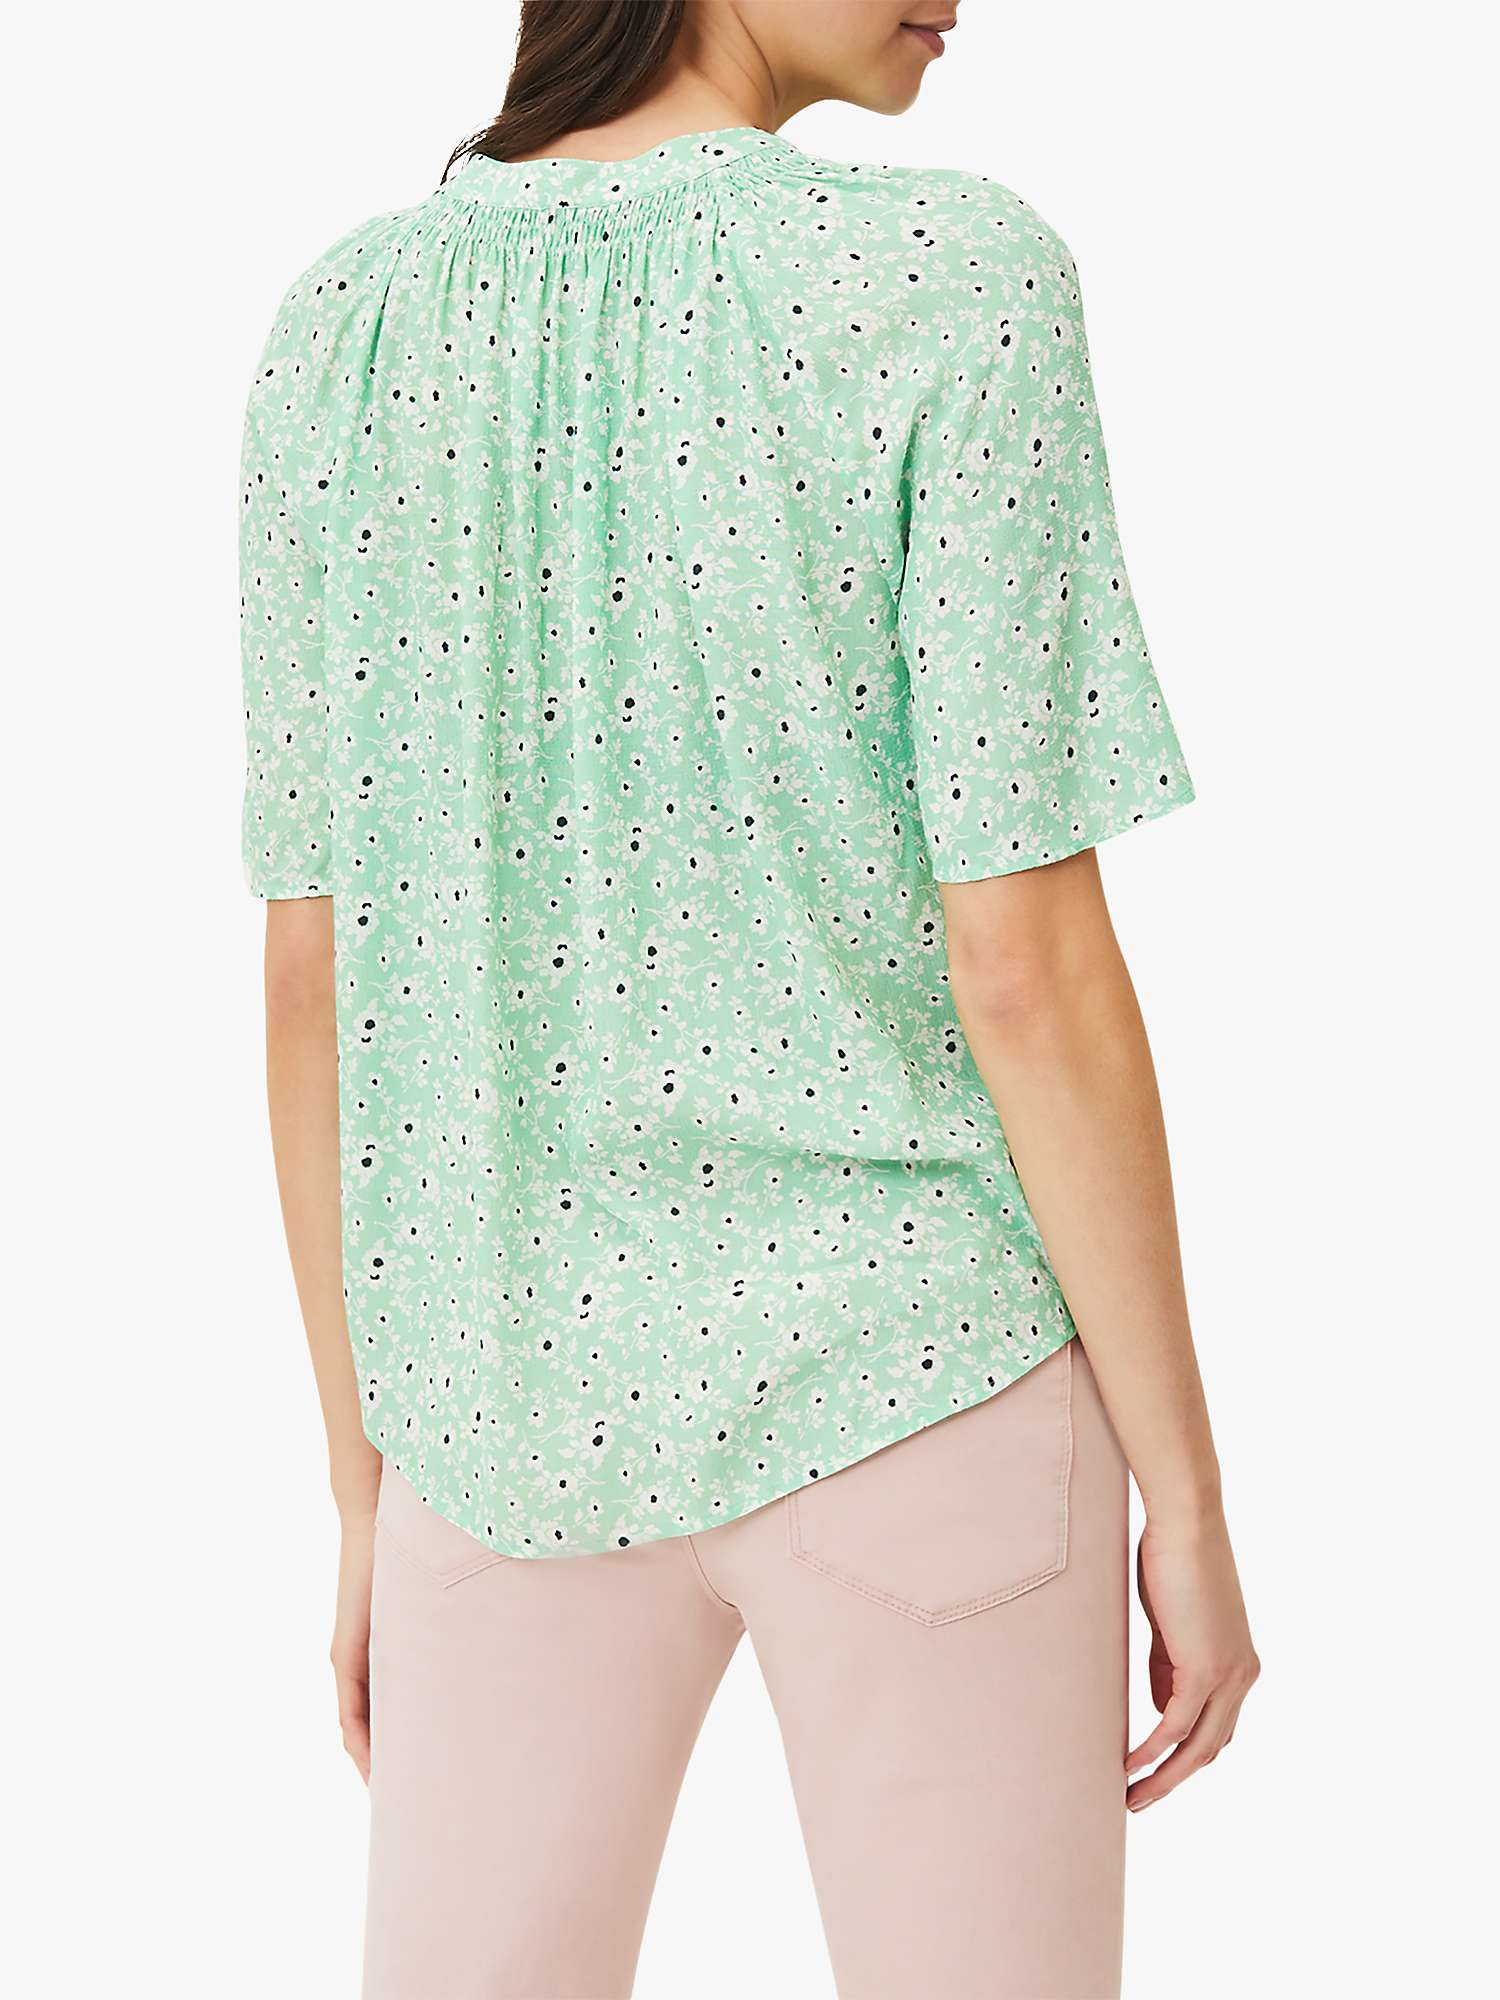 Buy Phase Eight Diana Sprig Print Tie Front Blouse, Green Online at johnlewis.com